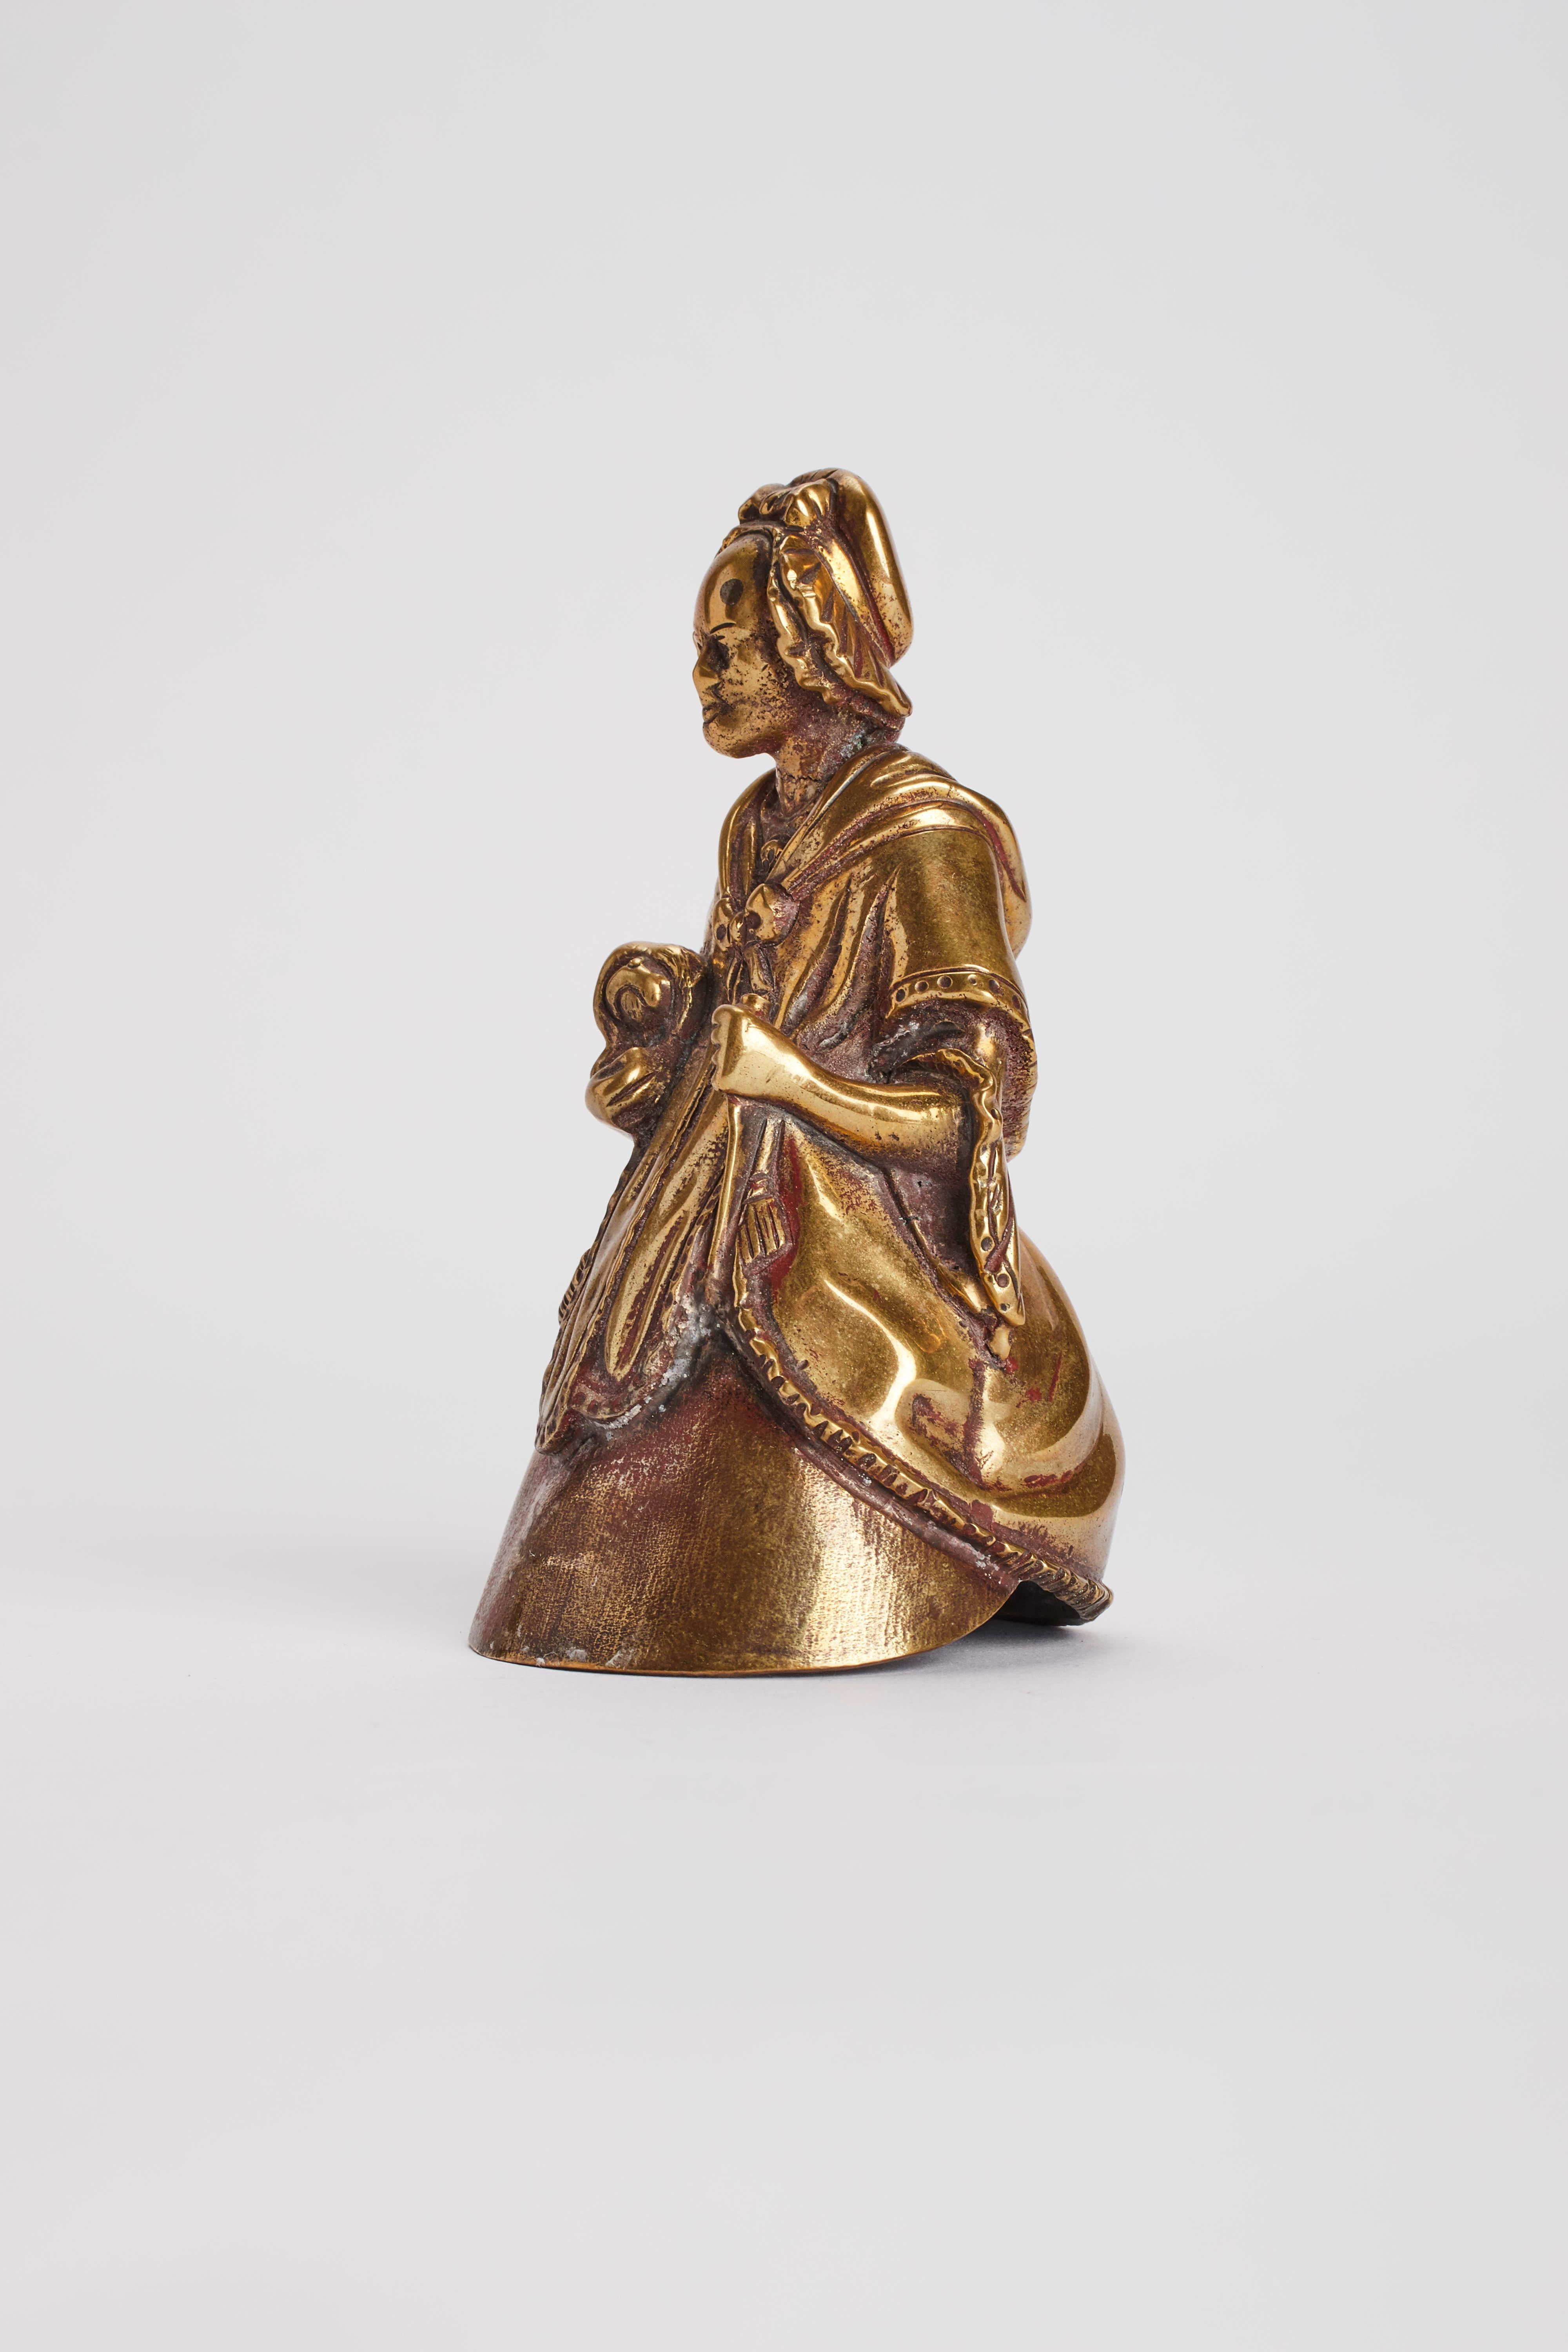 Vintage antique bronze table bell, depicting an old women. London, 1880 ca.